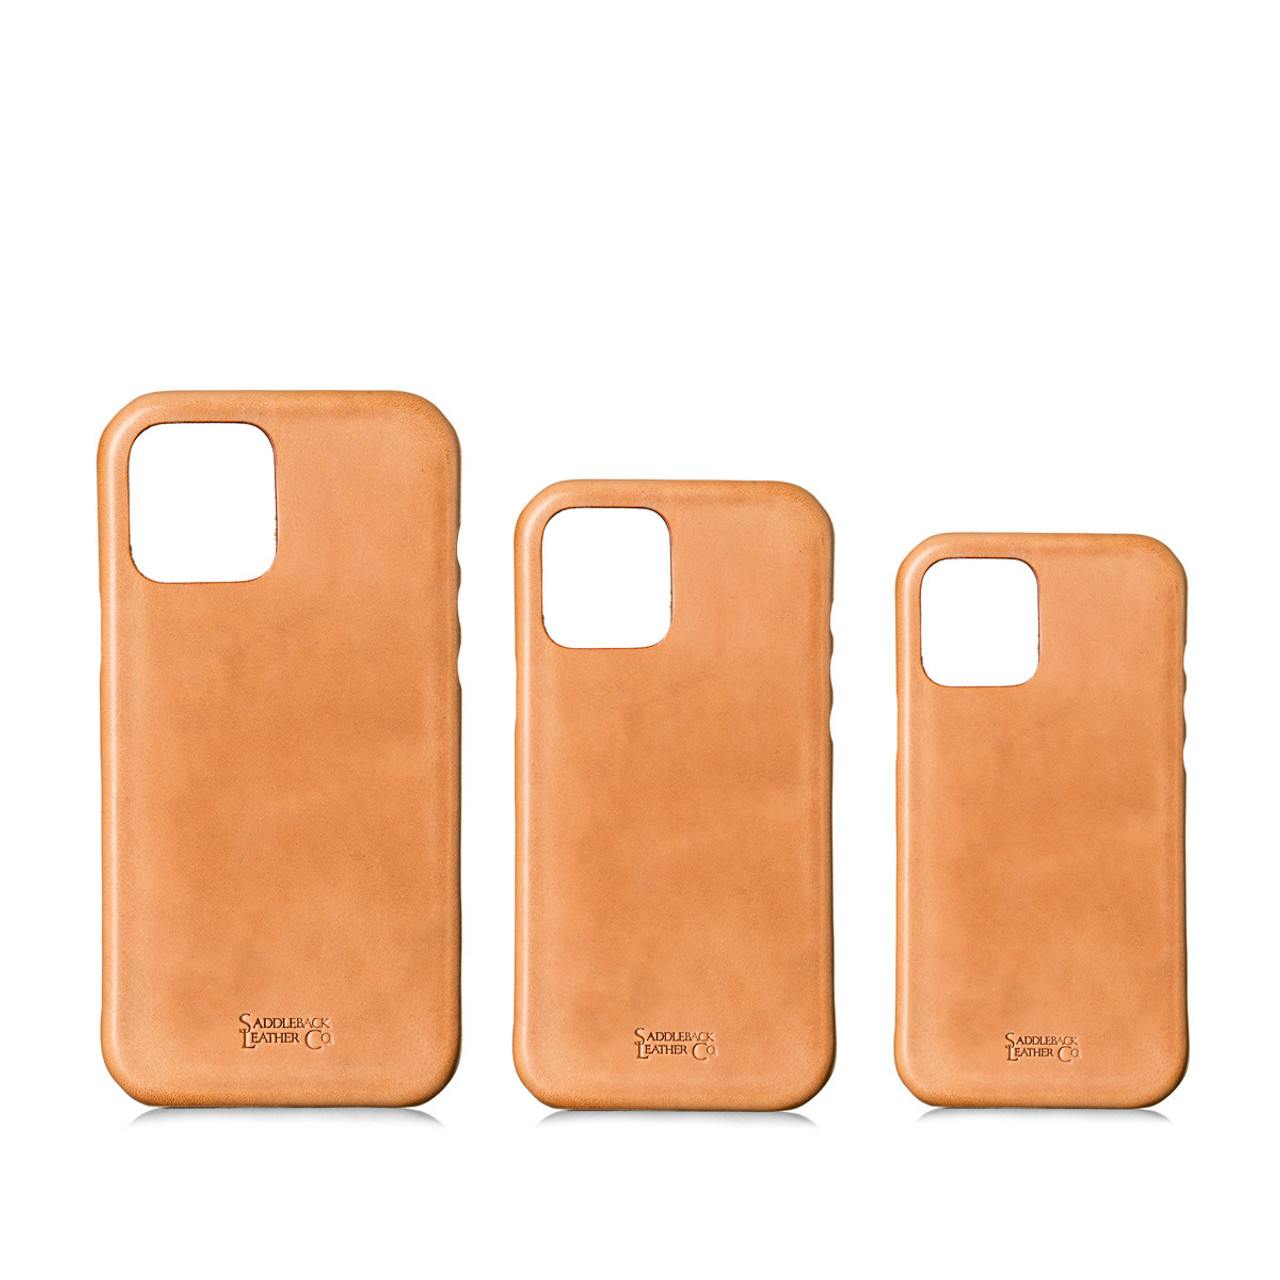 Boot Leather iPhone 12 Case